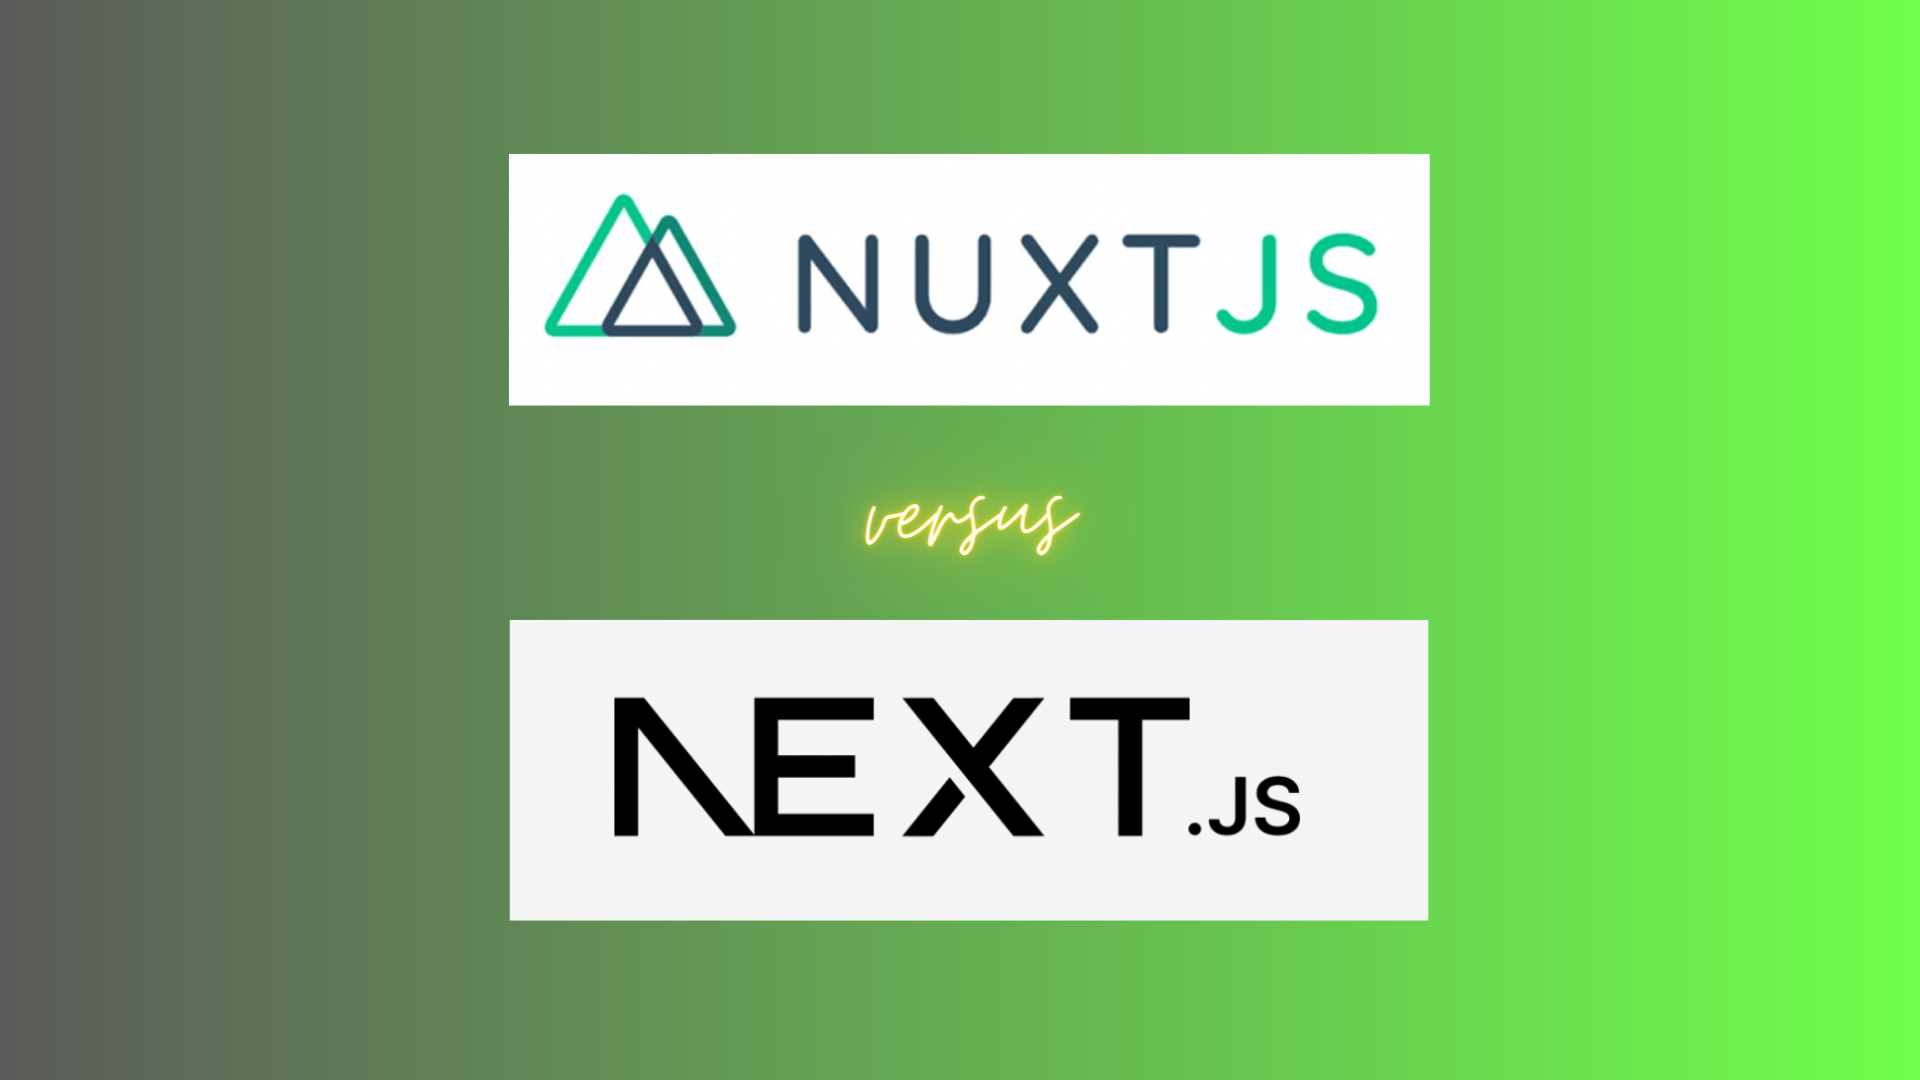 Nuxt.js vs Next.js on a blended brown and light green background with logos.